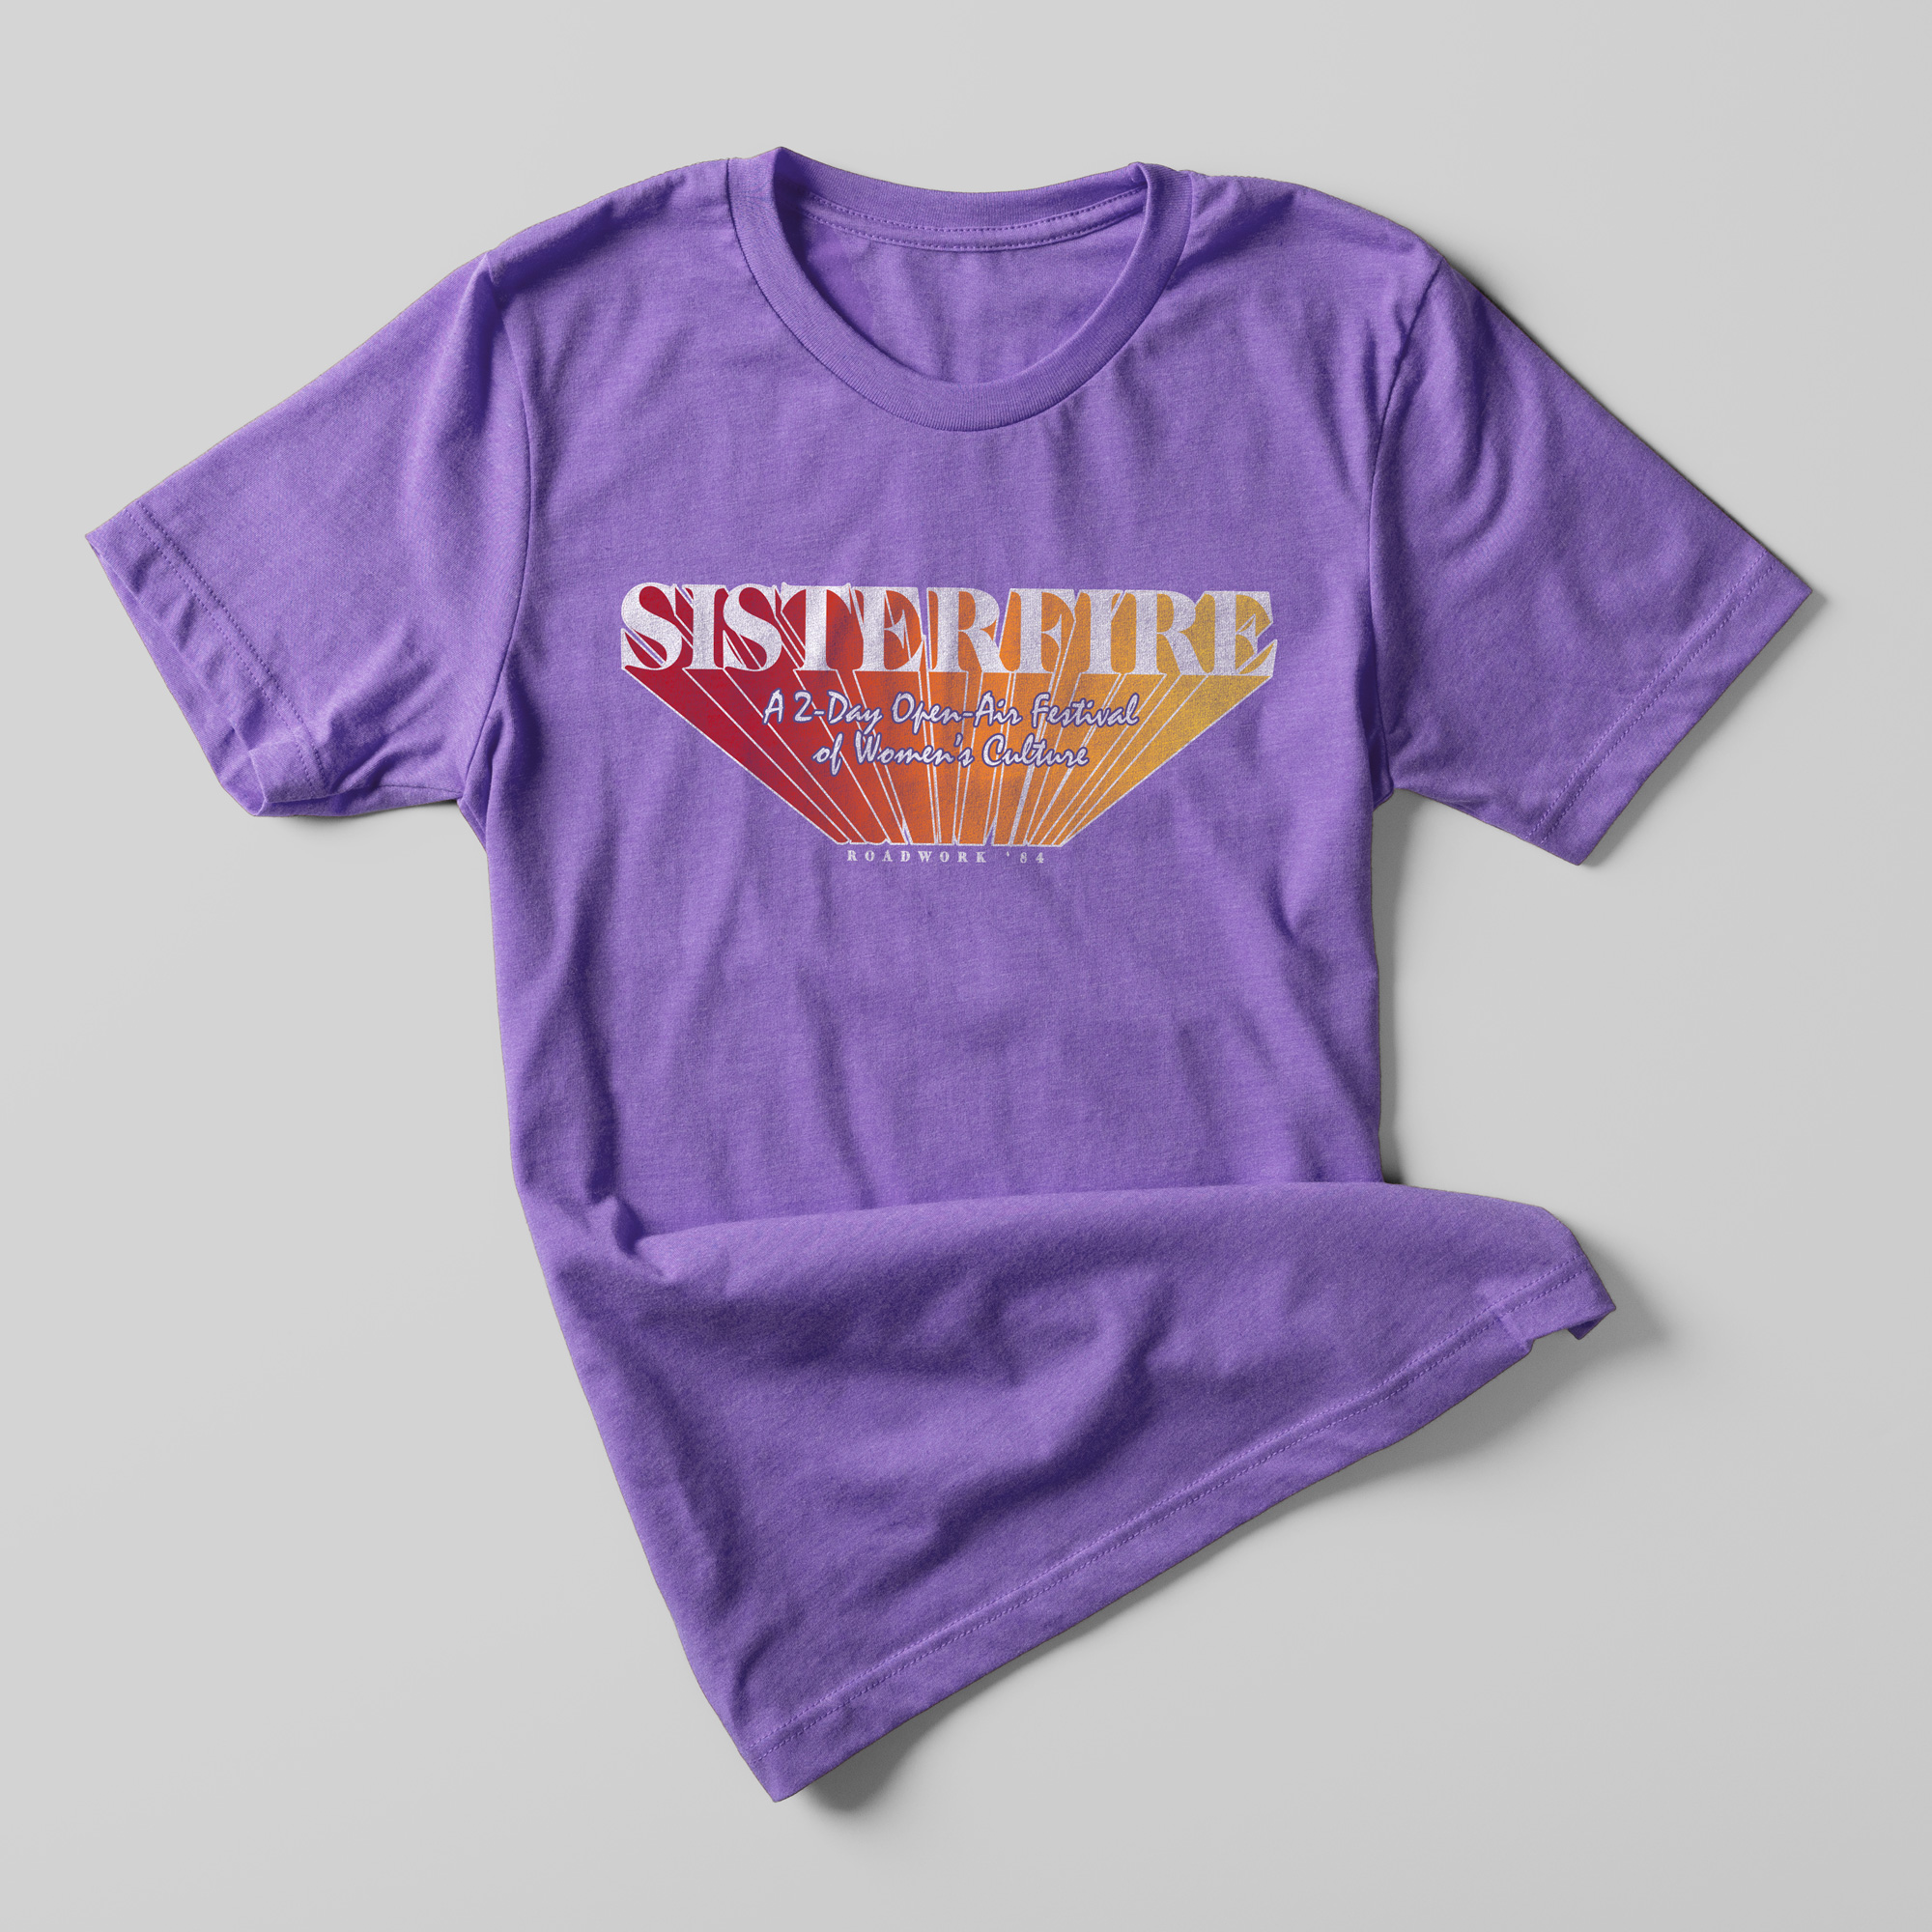 A purple t-shirt that reads "Sisterfire A 2-day Open Air Festival of Women's Culture"